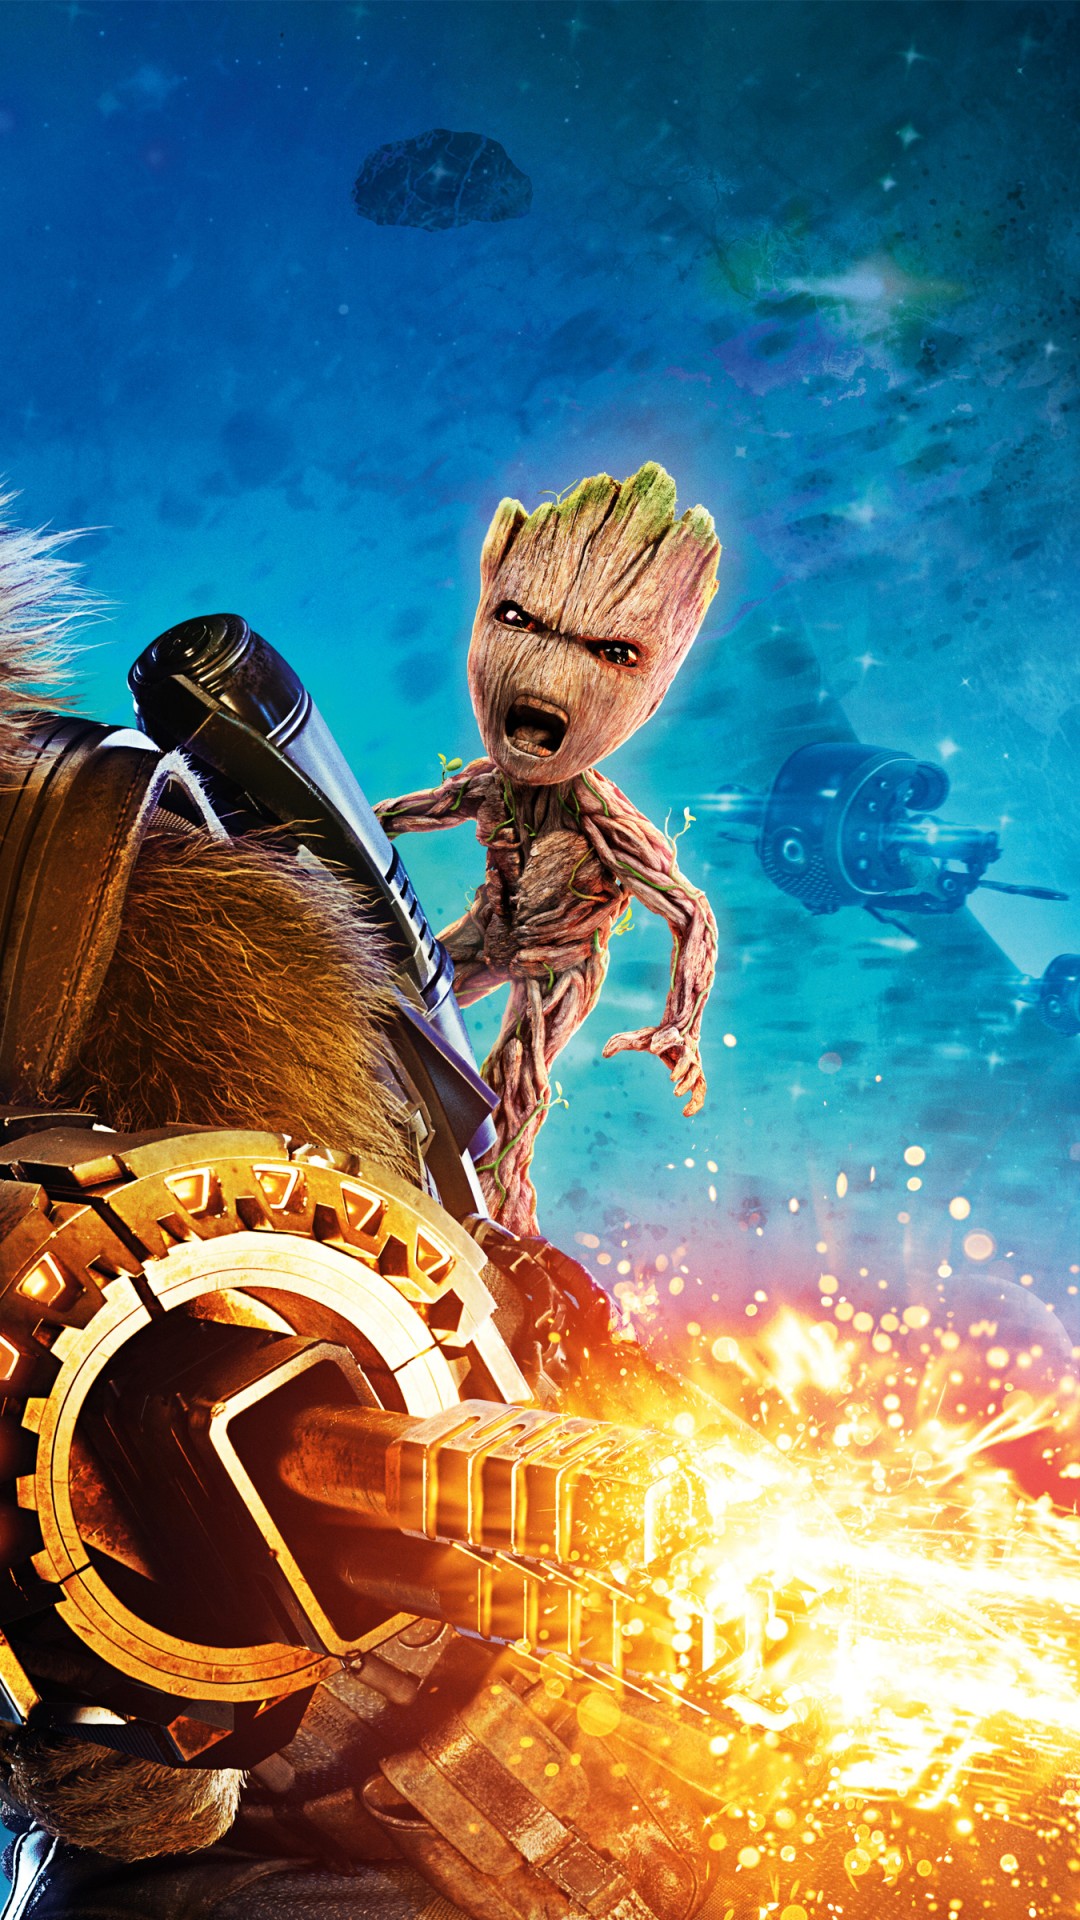 Rocket Guardians of The Galaxy Wallpaper for Desktop and Mobiles iPhone 6 /  6S Plus - HD Wallpaper 